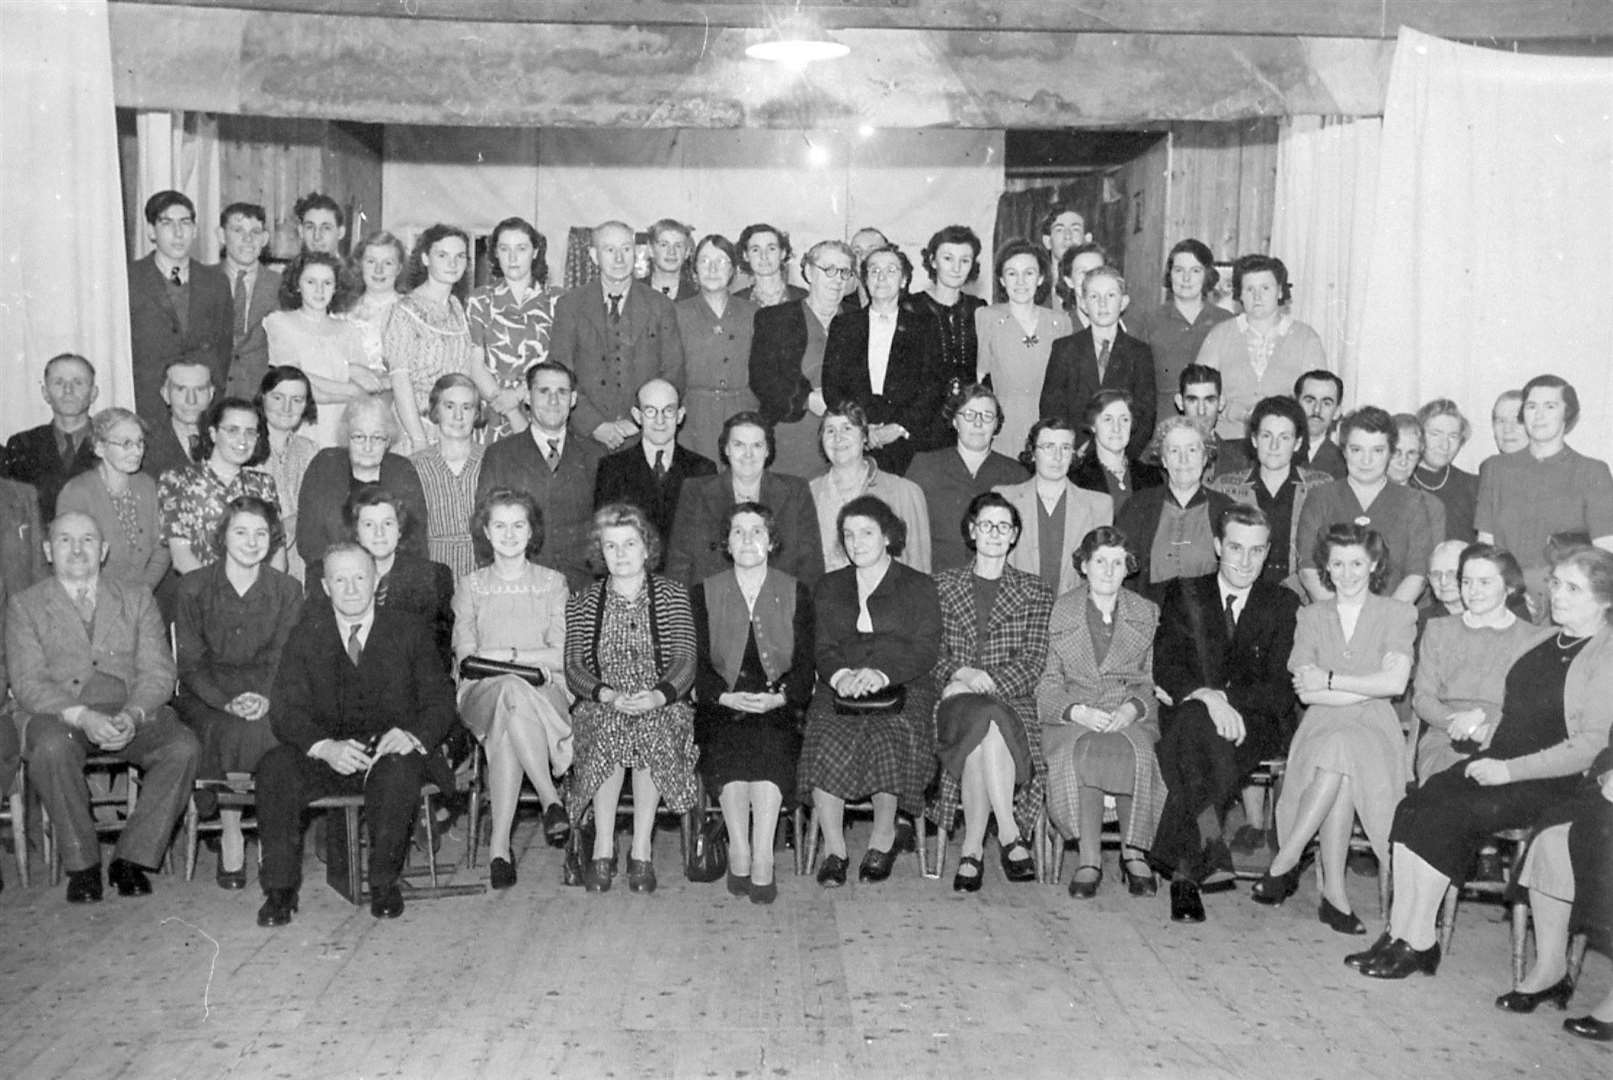 A photograph taken at Bilsington WI's Christmas party in 1950